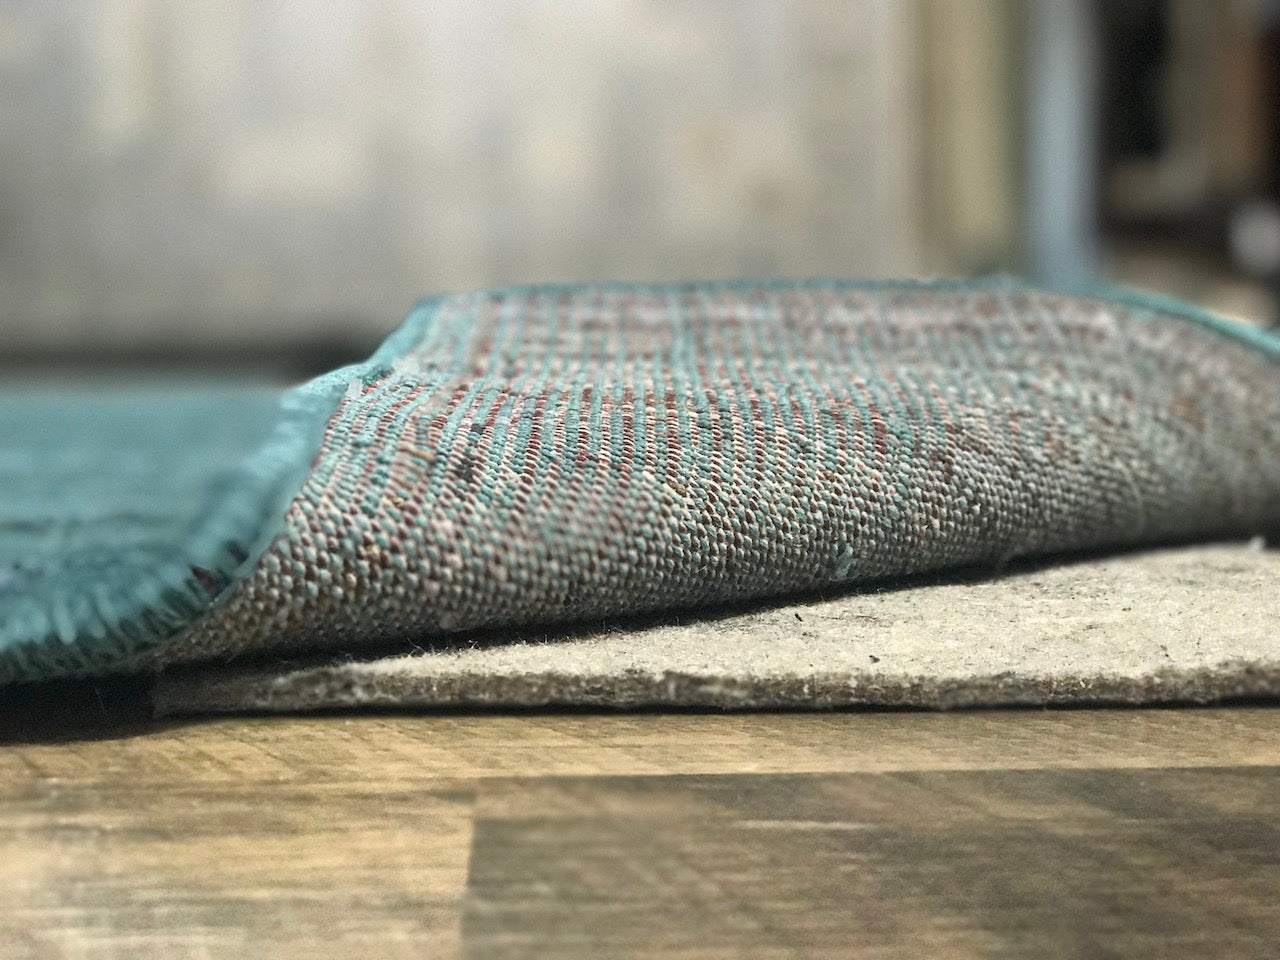 All-Weather Rug Pad